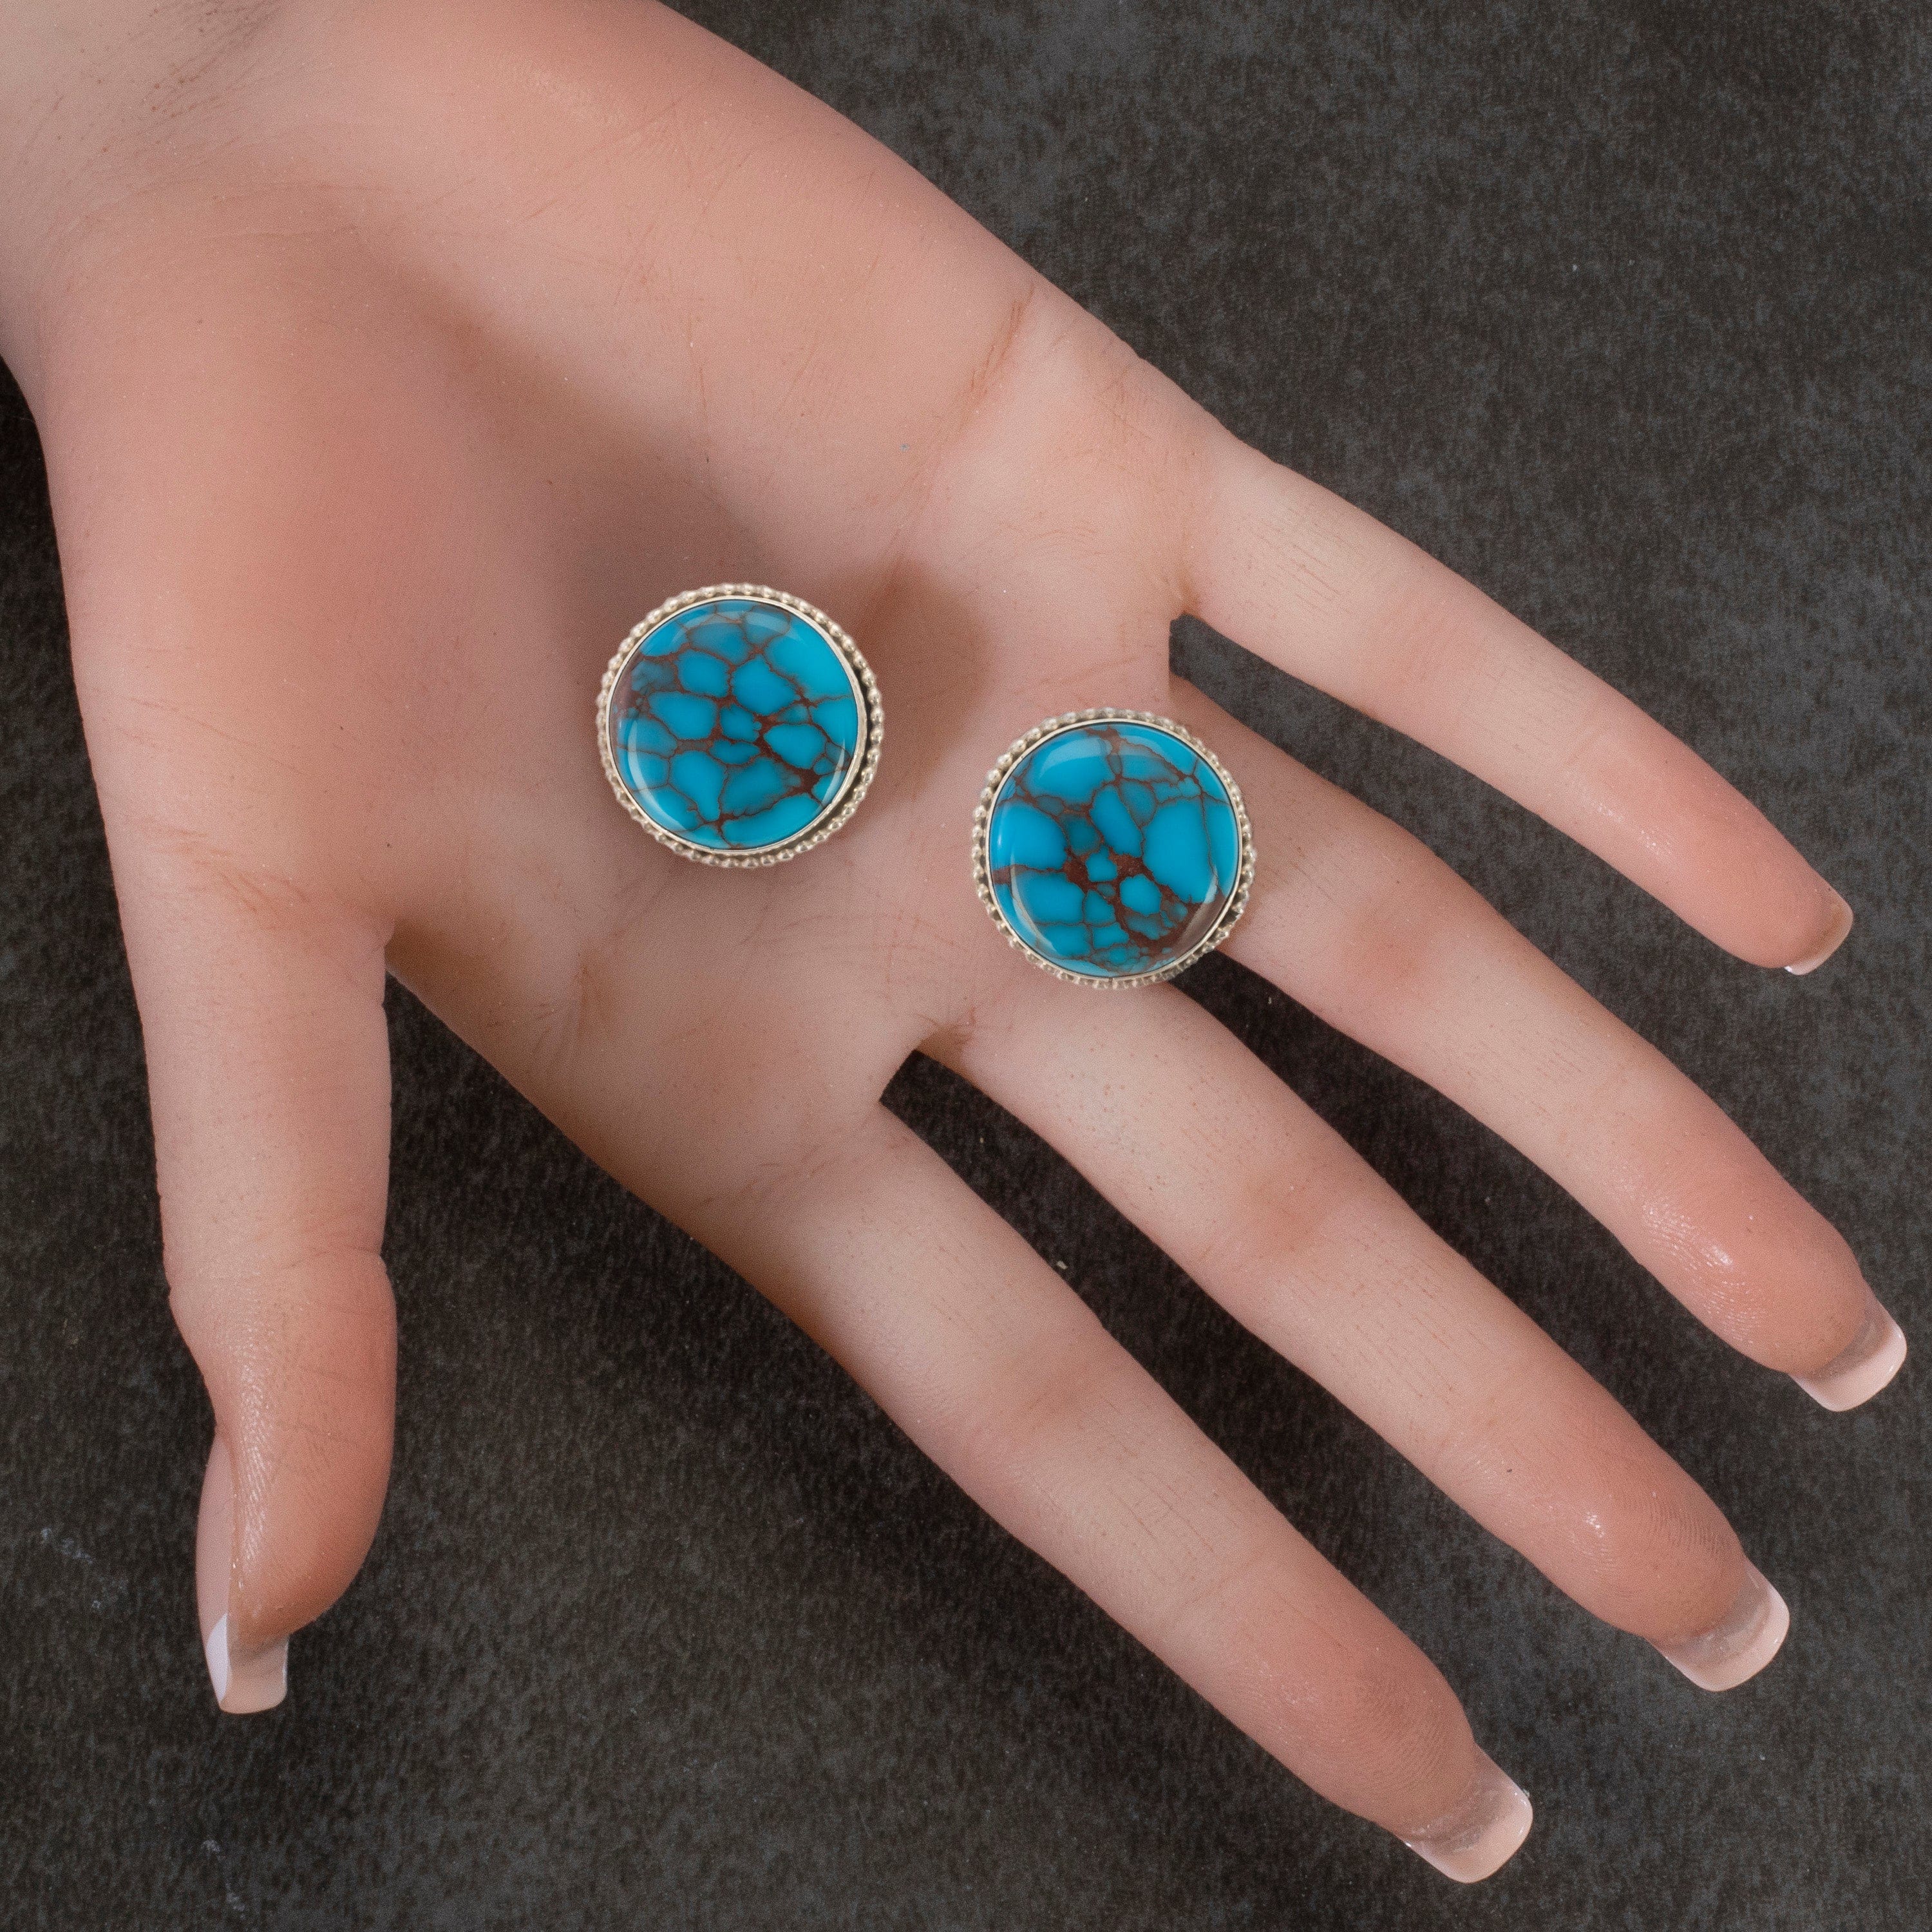 Kalifano Native American Jewelry Art Platero Prince Turquoise Circular USA Native American Made 925 Sterling Silver Earrings with Stud Backing NAE1800.003